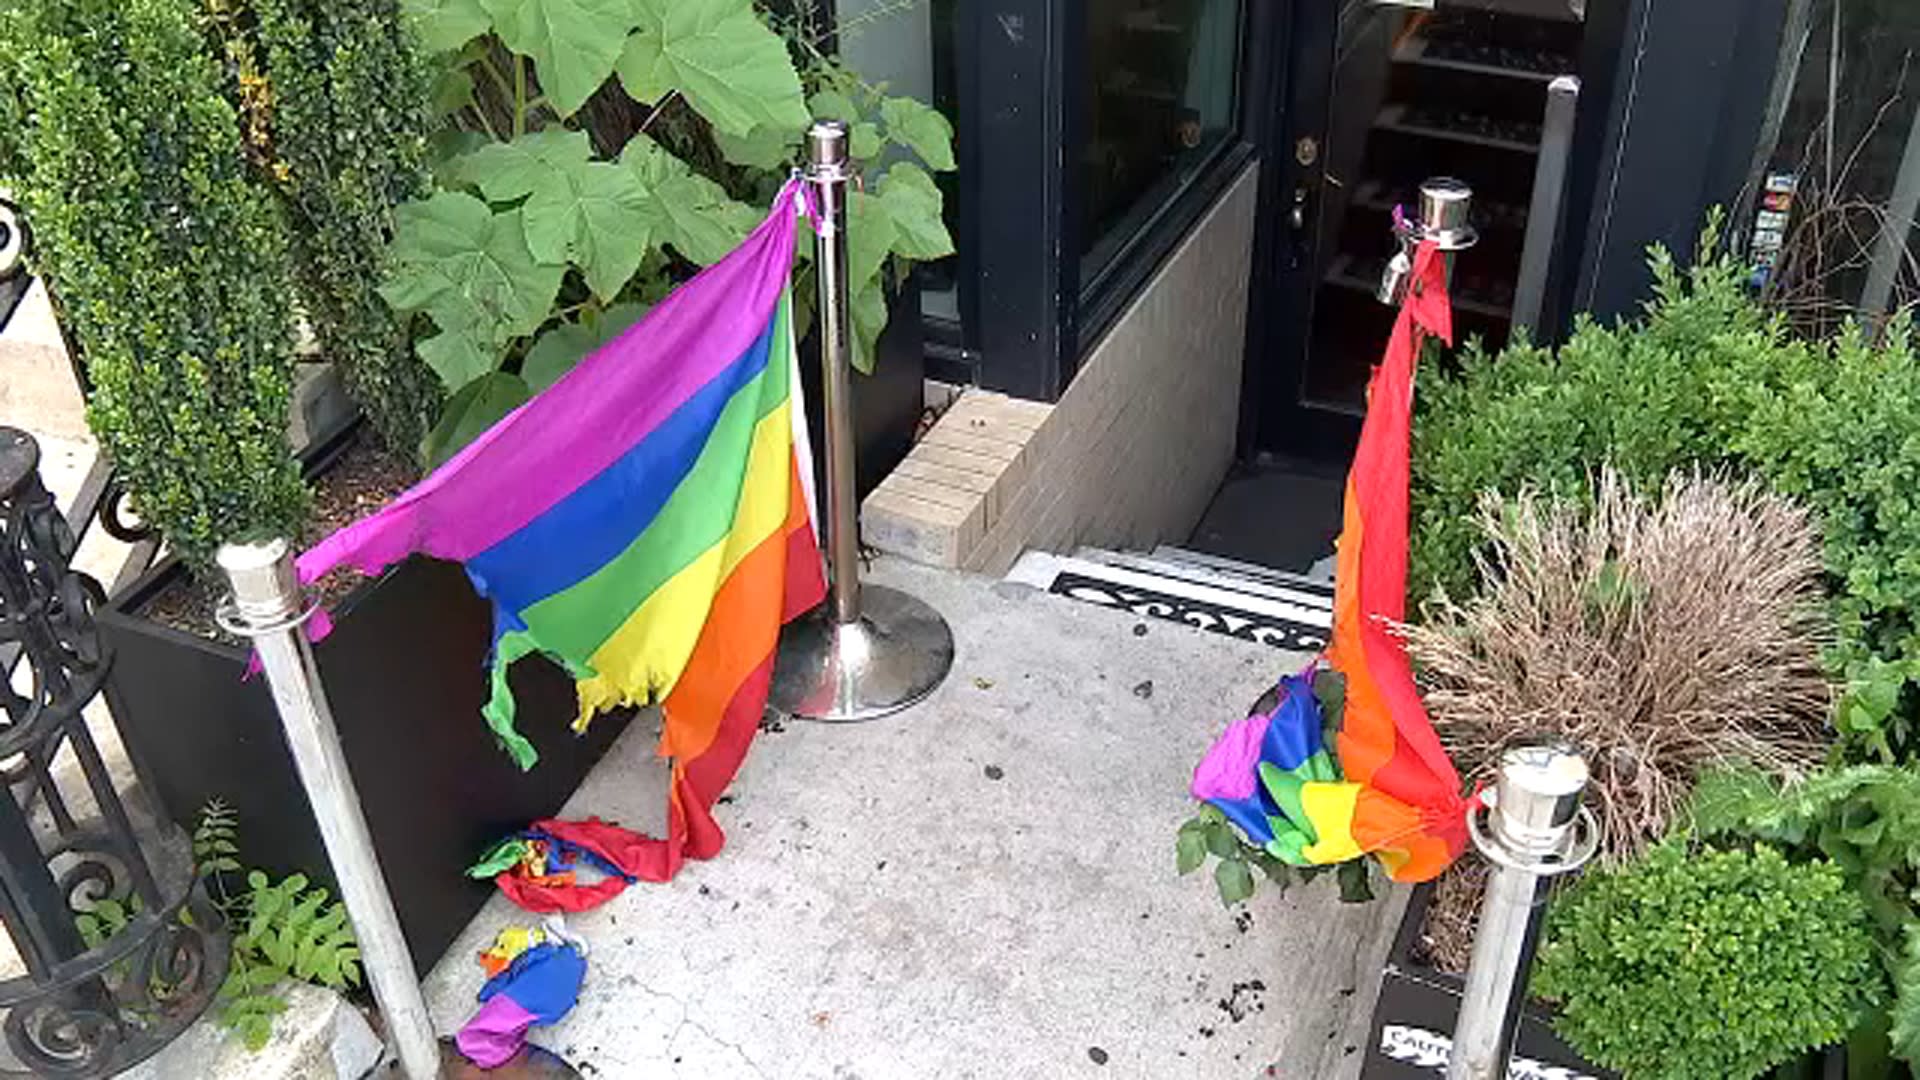 Police Investigate Hate Crime After 2 Rainbow Flags Were Set On Fire Outside Of Harlem Gay Bar